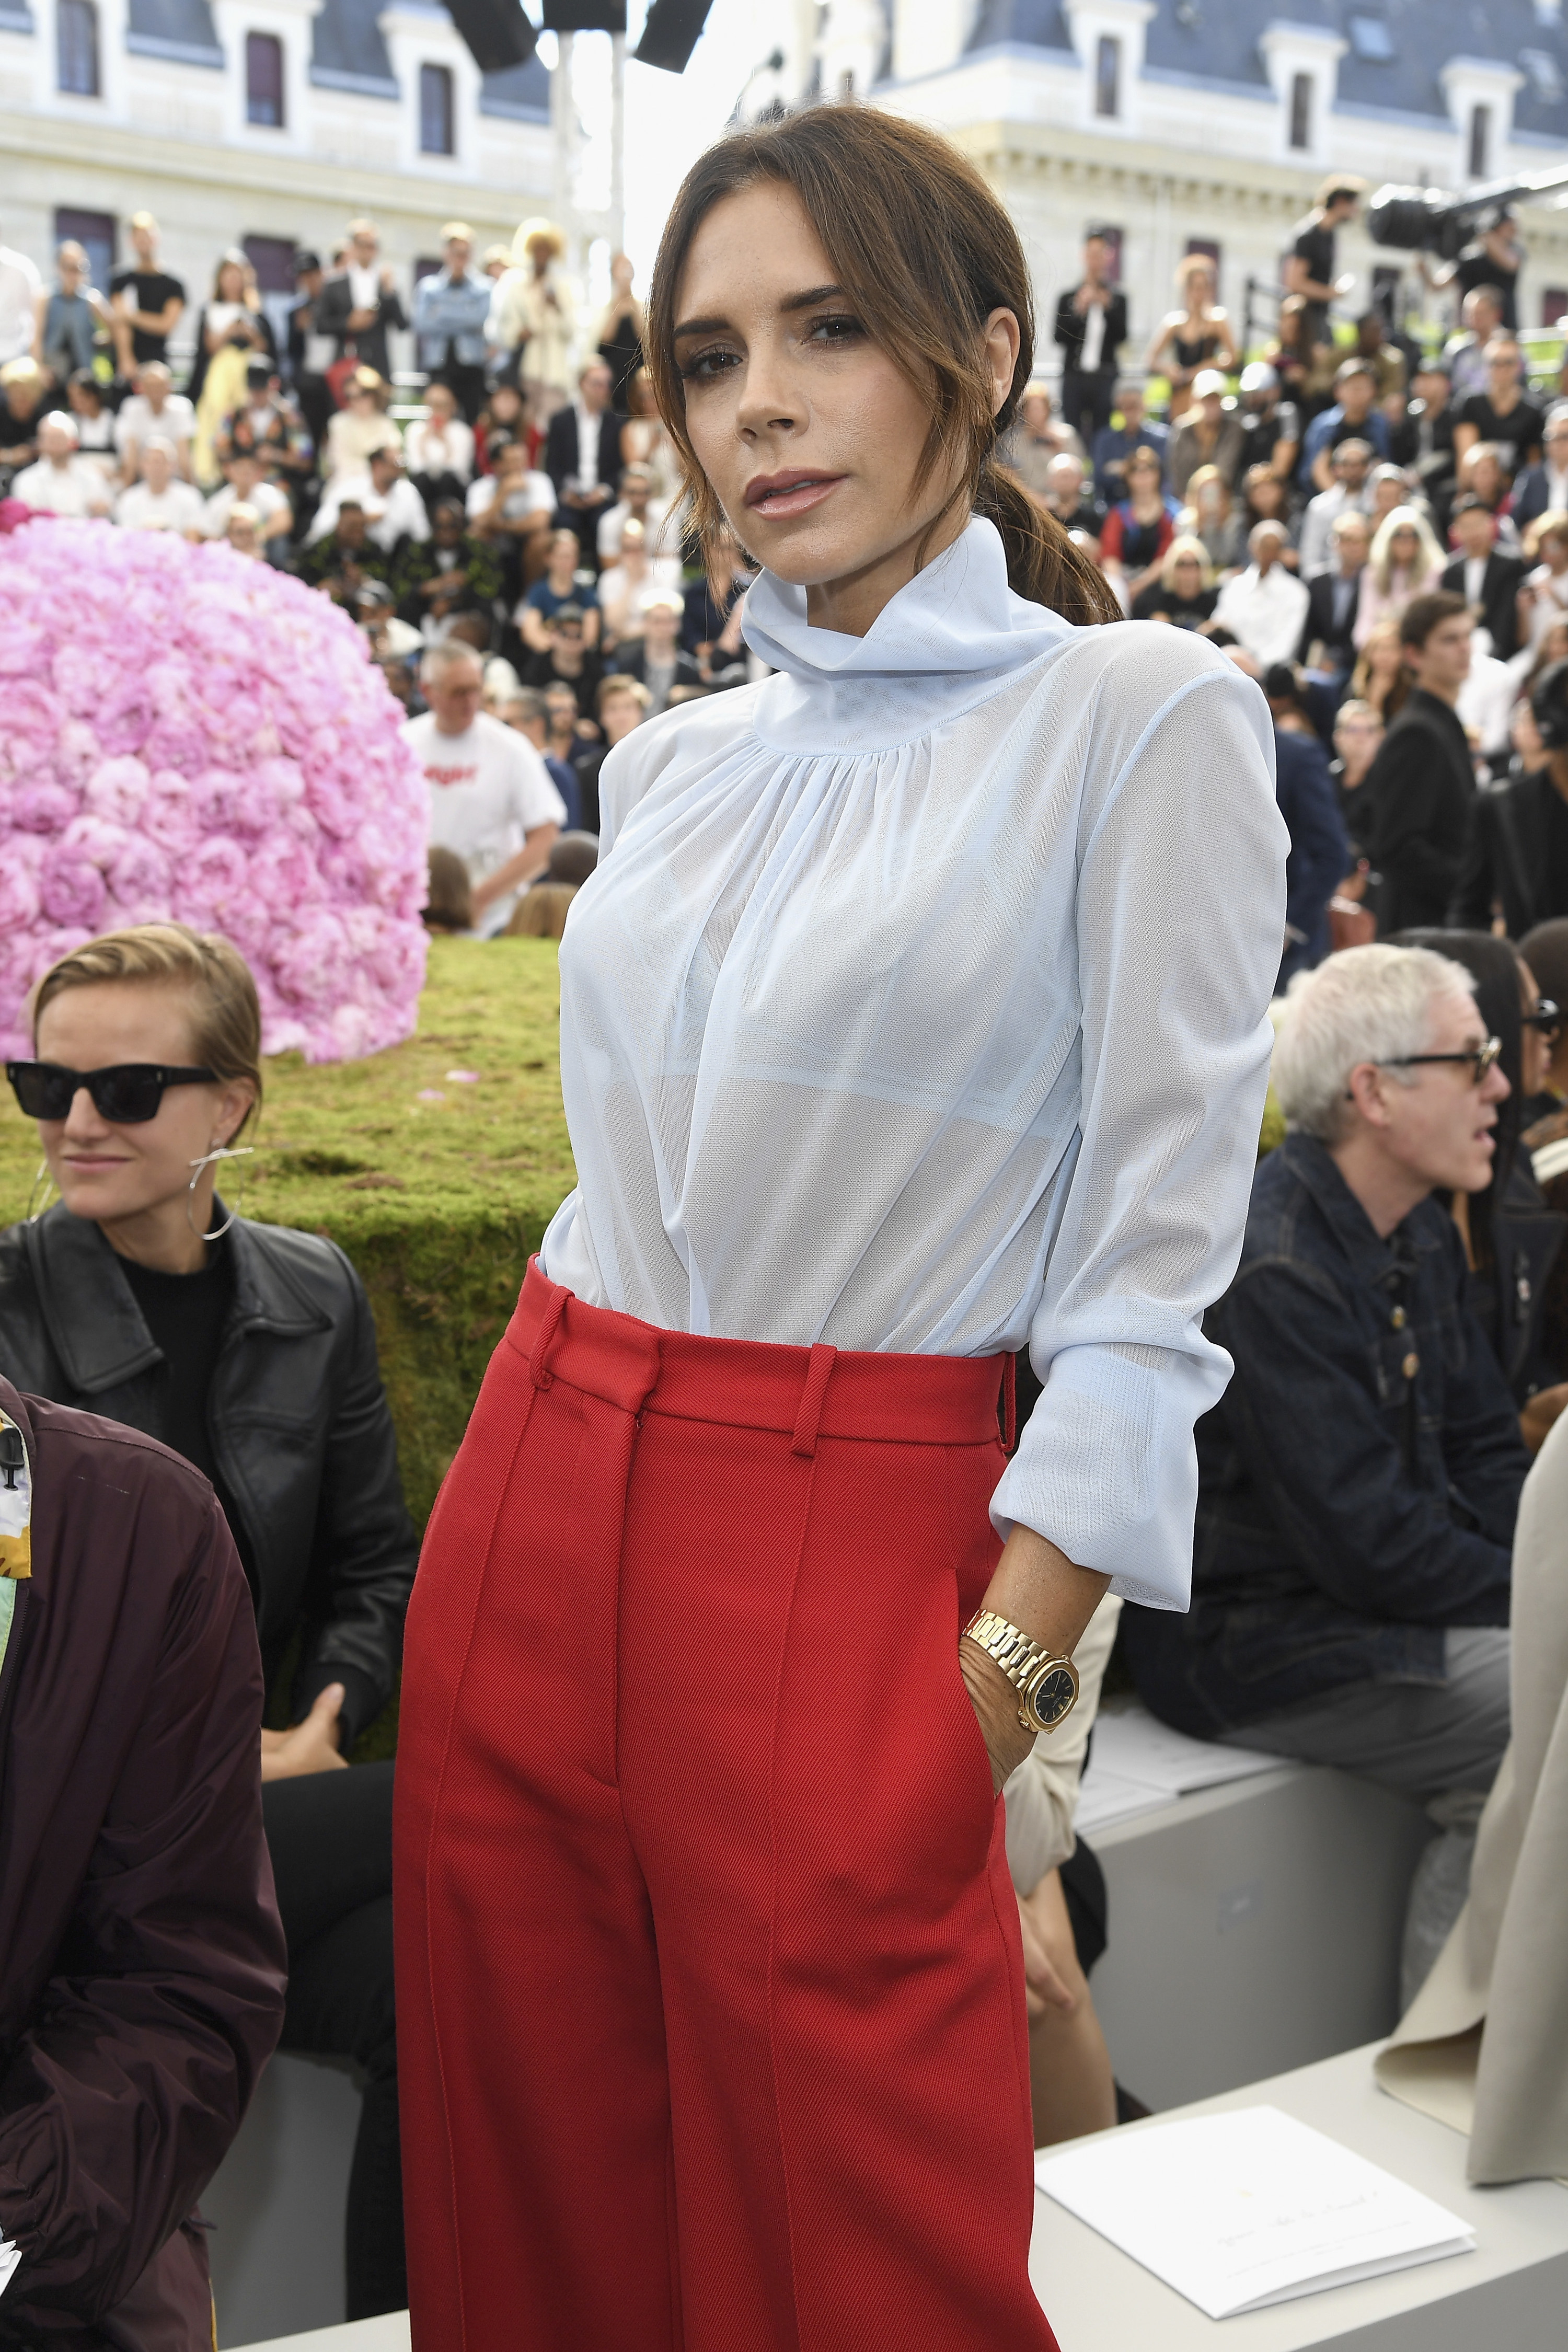 Victoria Beckham stands proudly at a fashion event wearing trousers and a see-through blouse